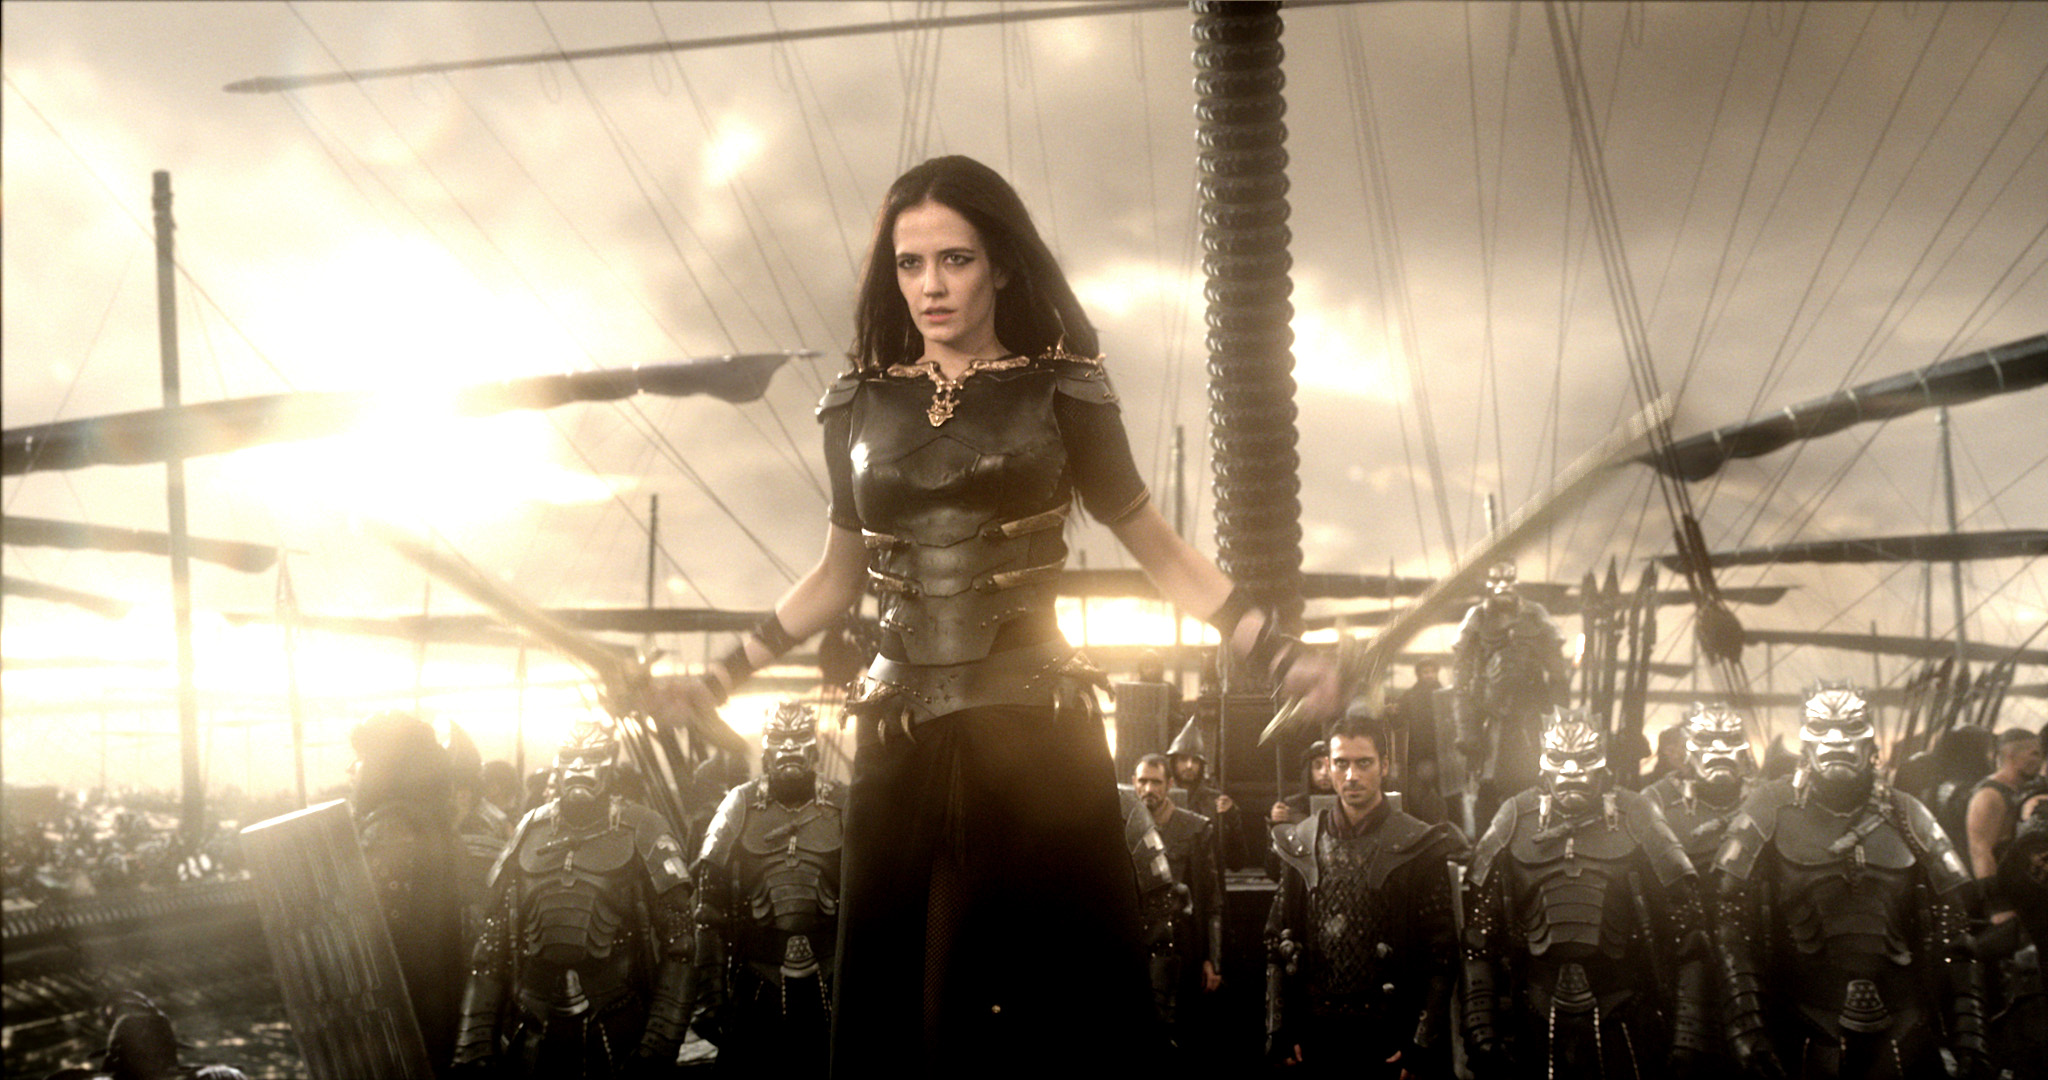 ‘Rise of an Empire’ is bloody but pulseless